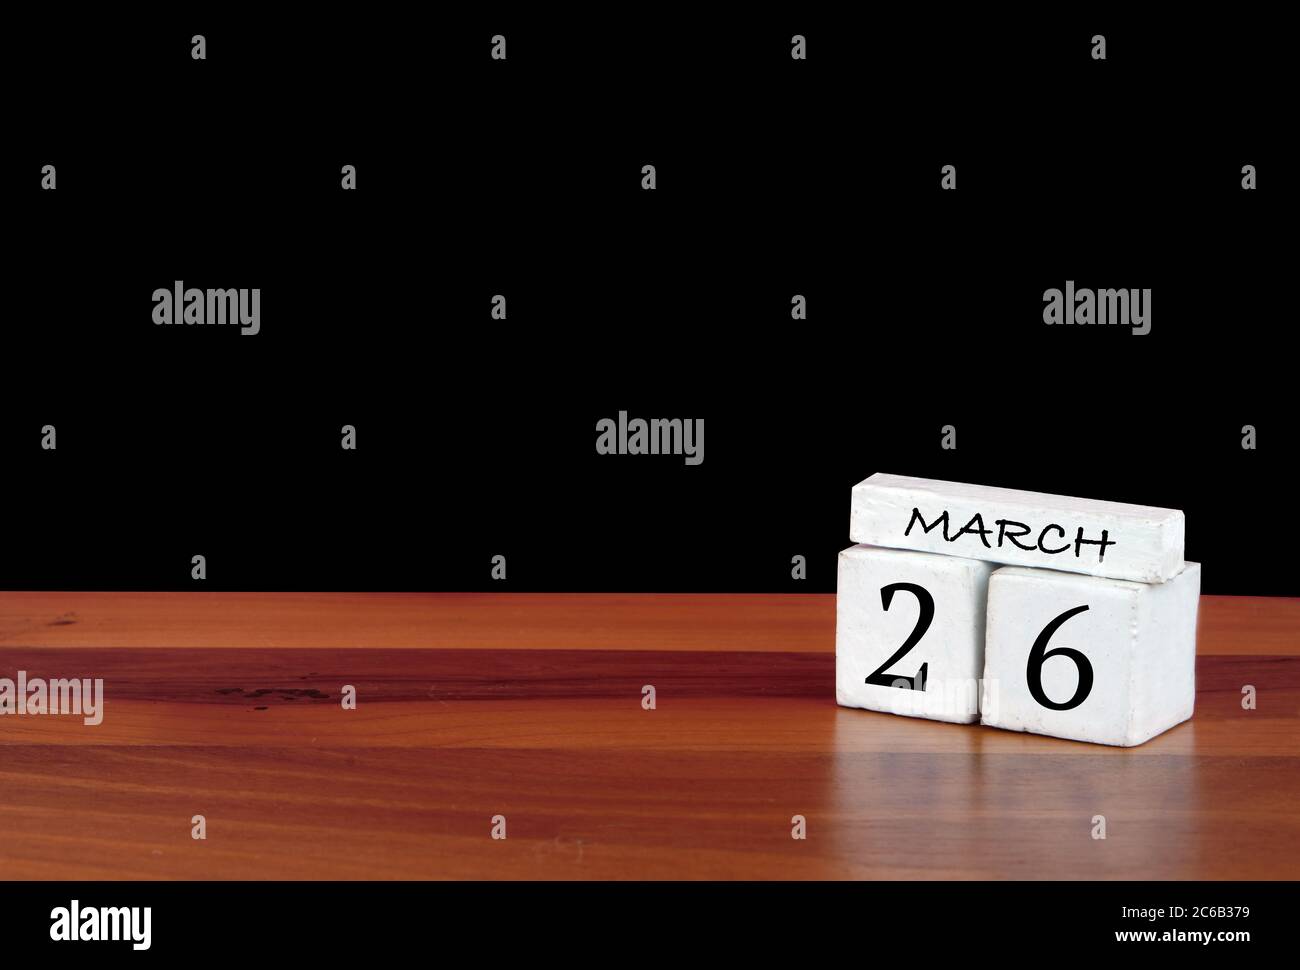 26 March calendar month. 26 days of the month. Reflected calendar on wooden floor with black background Stock Photo